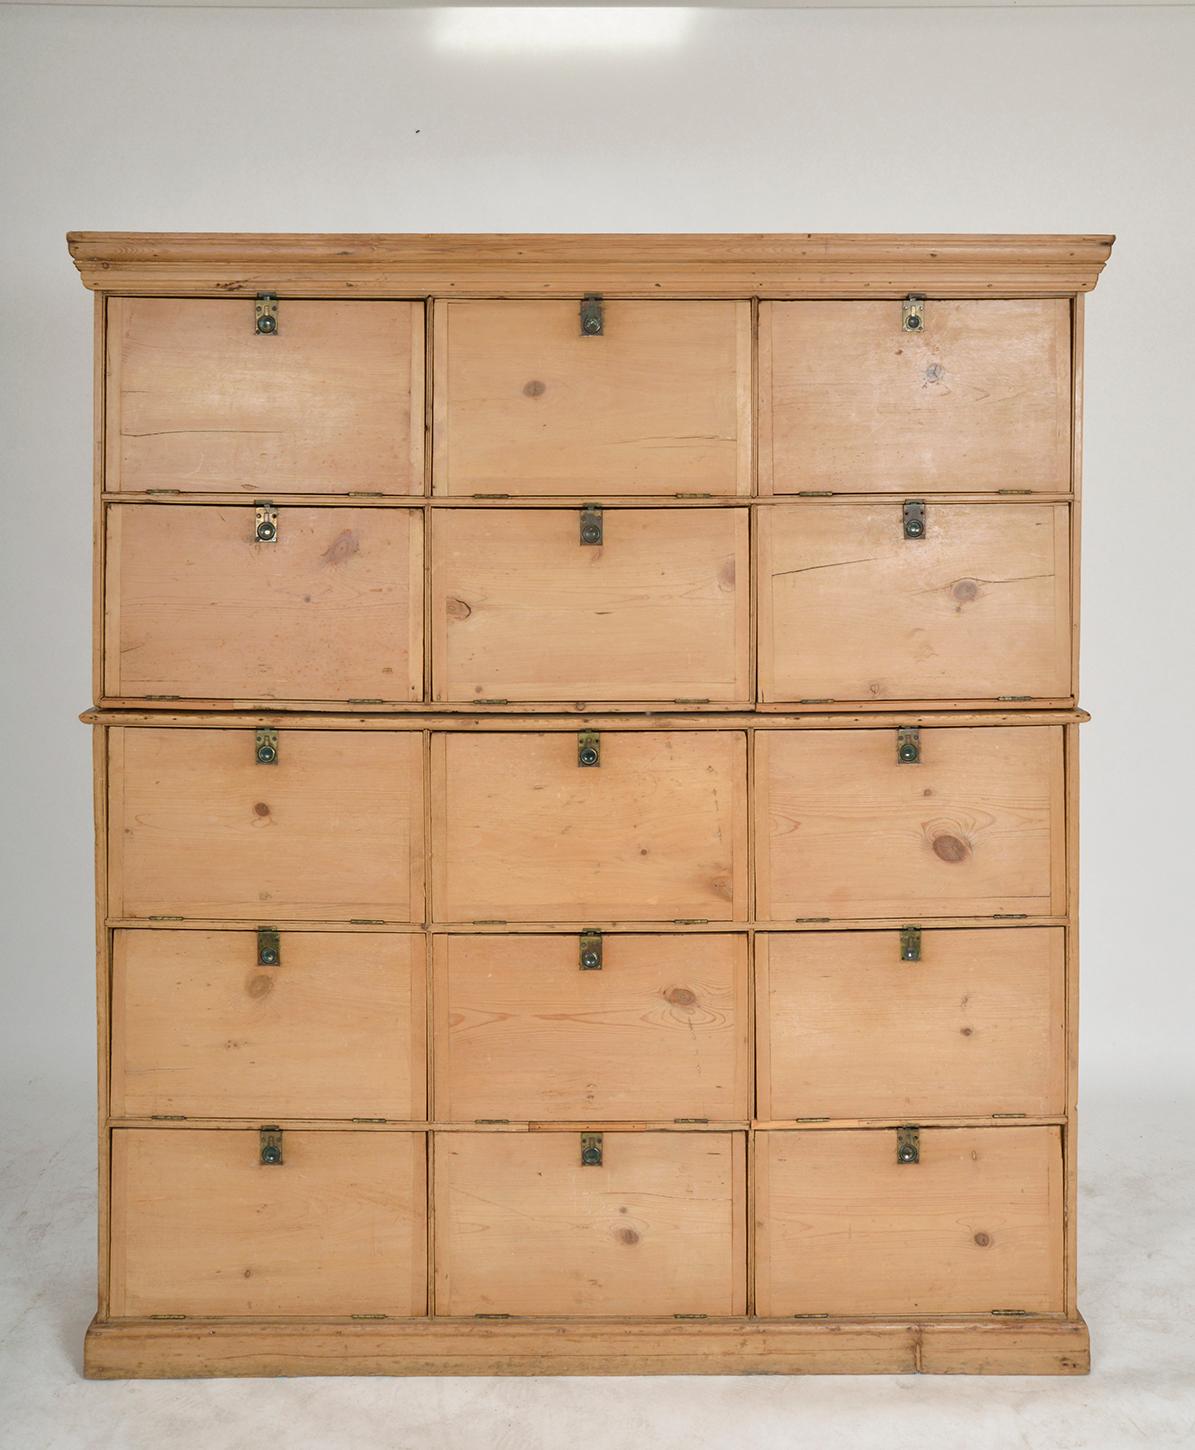 This large pine antique cupboard/locker with 15 cupboards dates from the late 19th / early 20th century, and was originally made for a local solicitors office. Inside a few of the drop-down doors, the original content text still remains, albeit